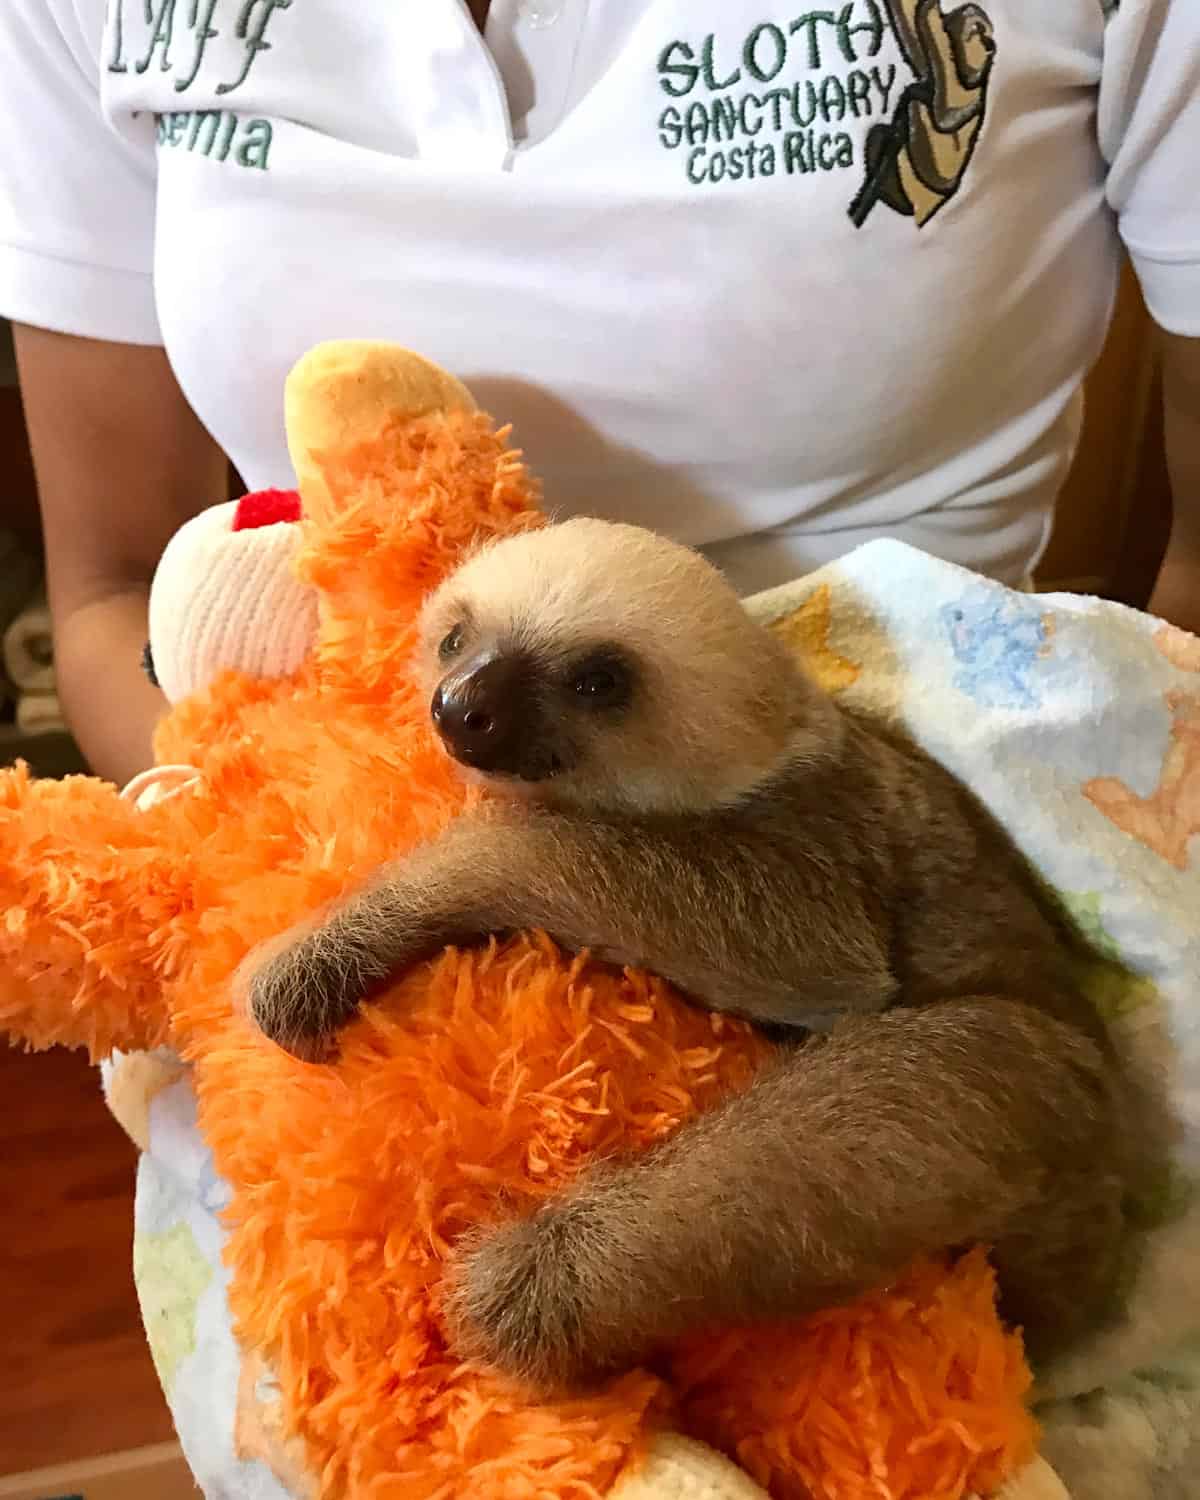 a baby sloth at the sloth sanctuary in costa rica